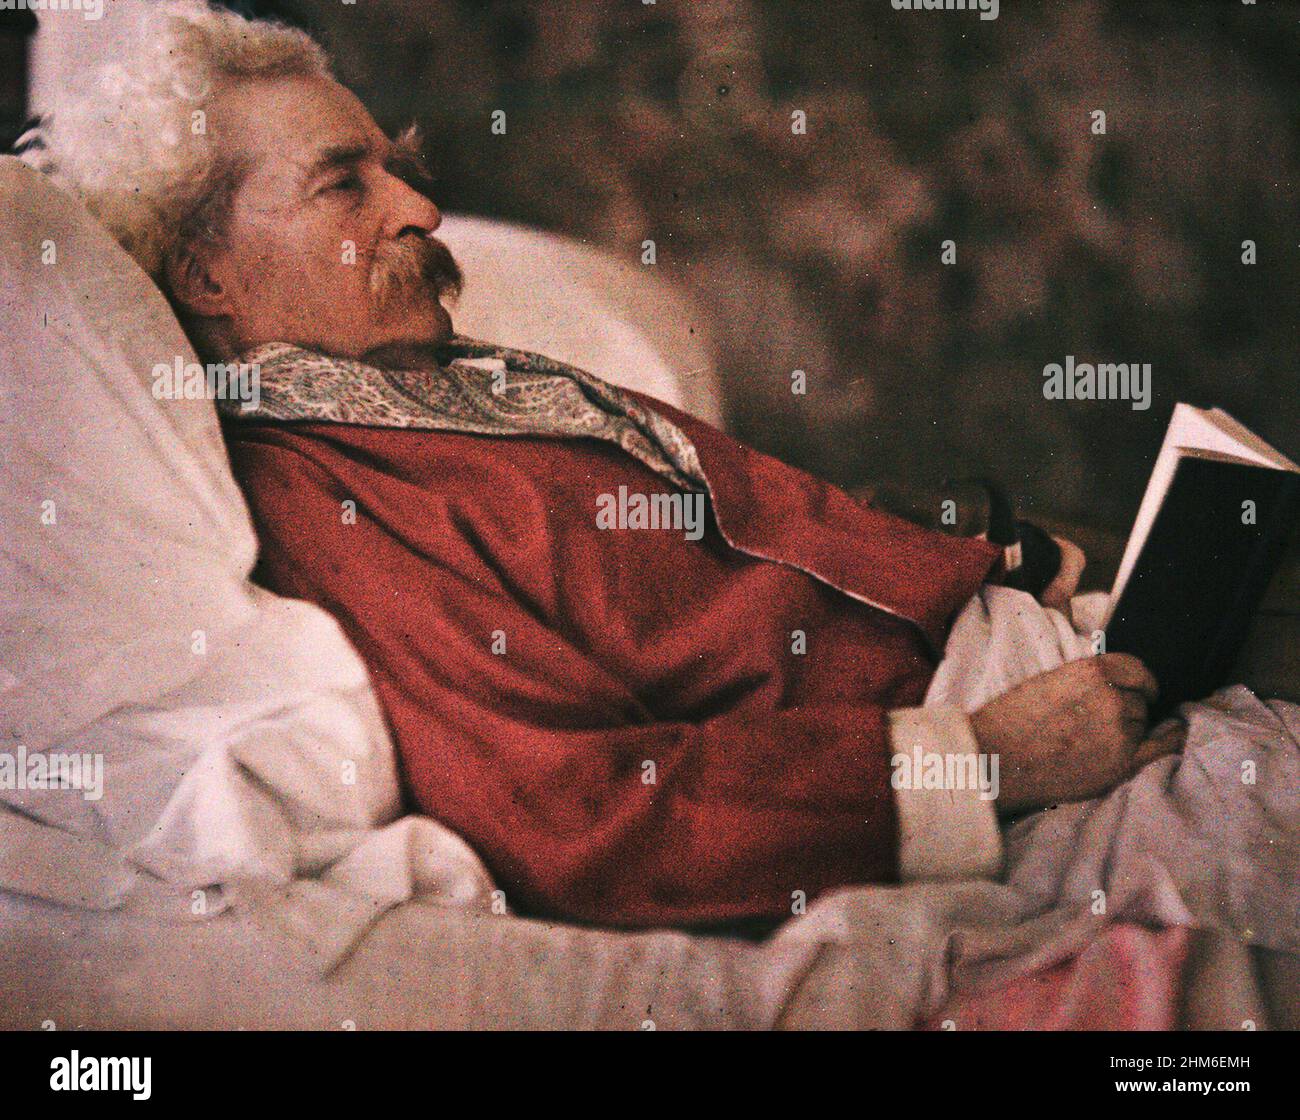 The american writer Mark Twain (real name Samuel Clemens), author of Tom Sawyer and Huckleberry Finn. The photo (taken by the autochrome process) is from 1908 when the author was 72. Stock Photo